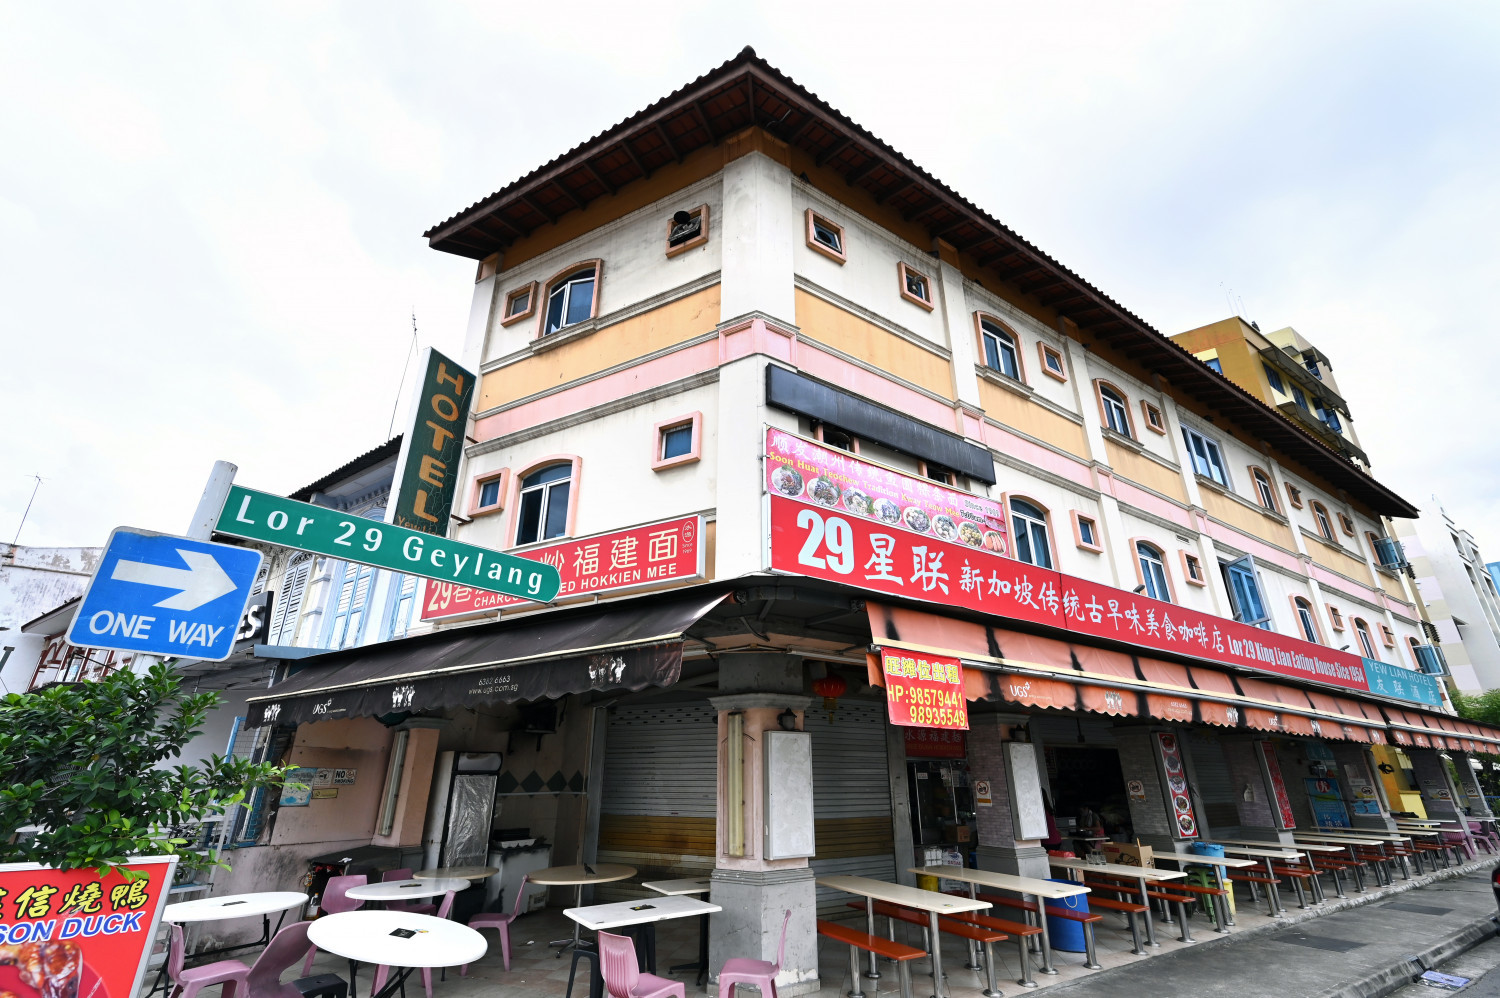 Rare hotel/coffeeshop shophouse in Geylang up for sale - Property News